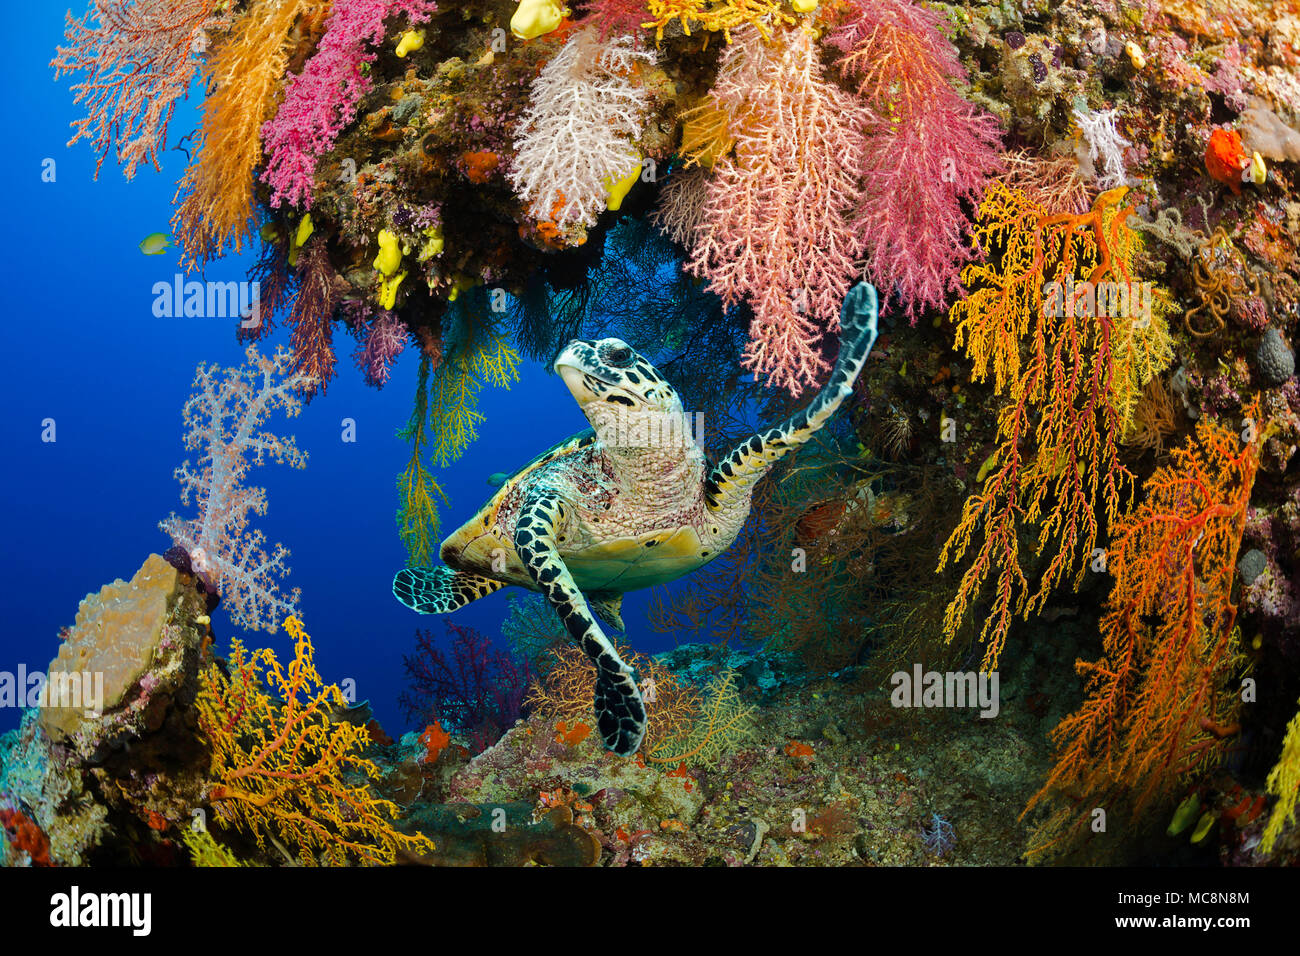 A hawksbill turtle, Eretmochelys imbricata, and a colorful overhang on a reef in the Koro Sea, Fiji. Stock Photo